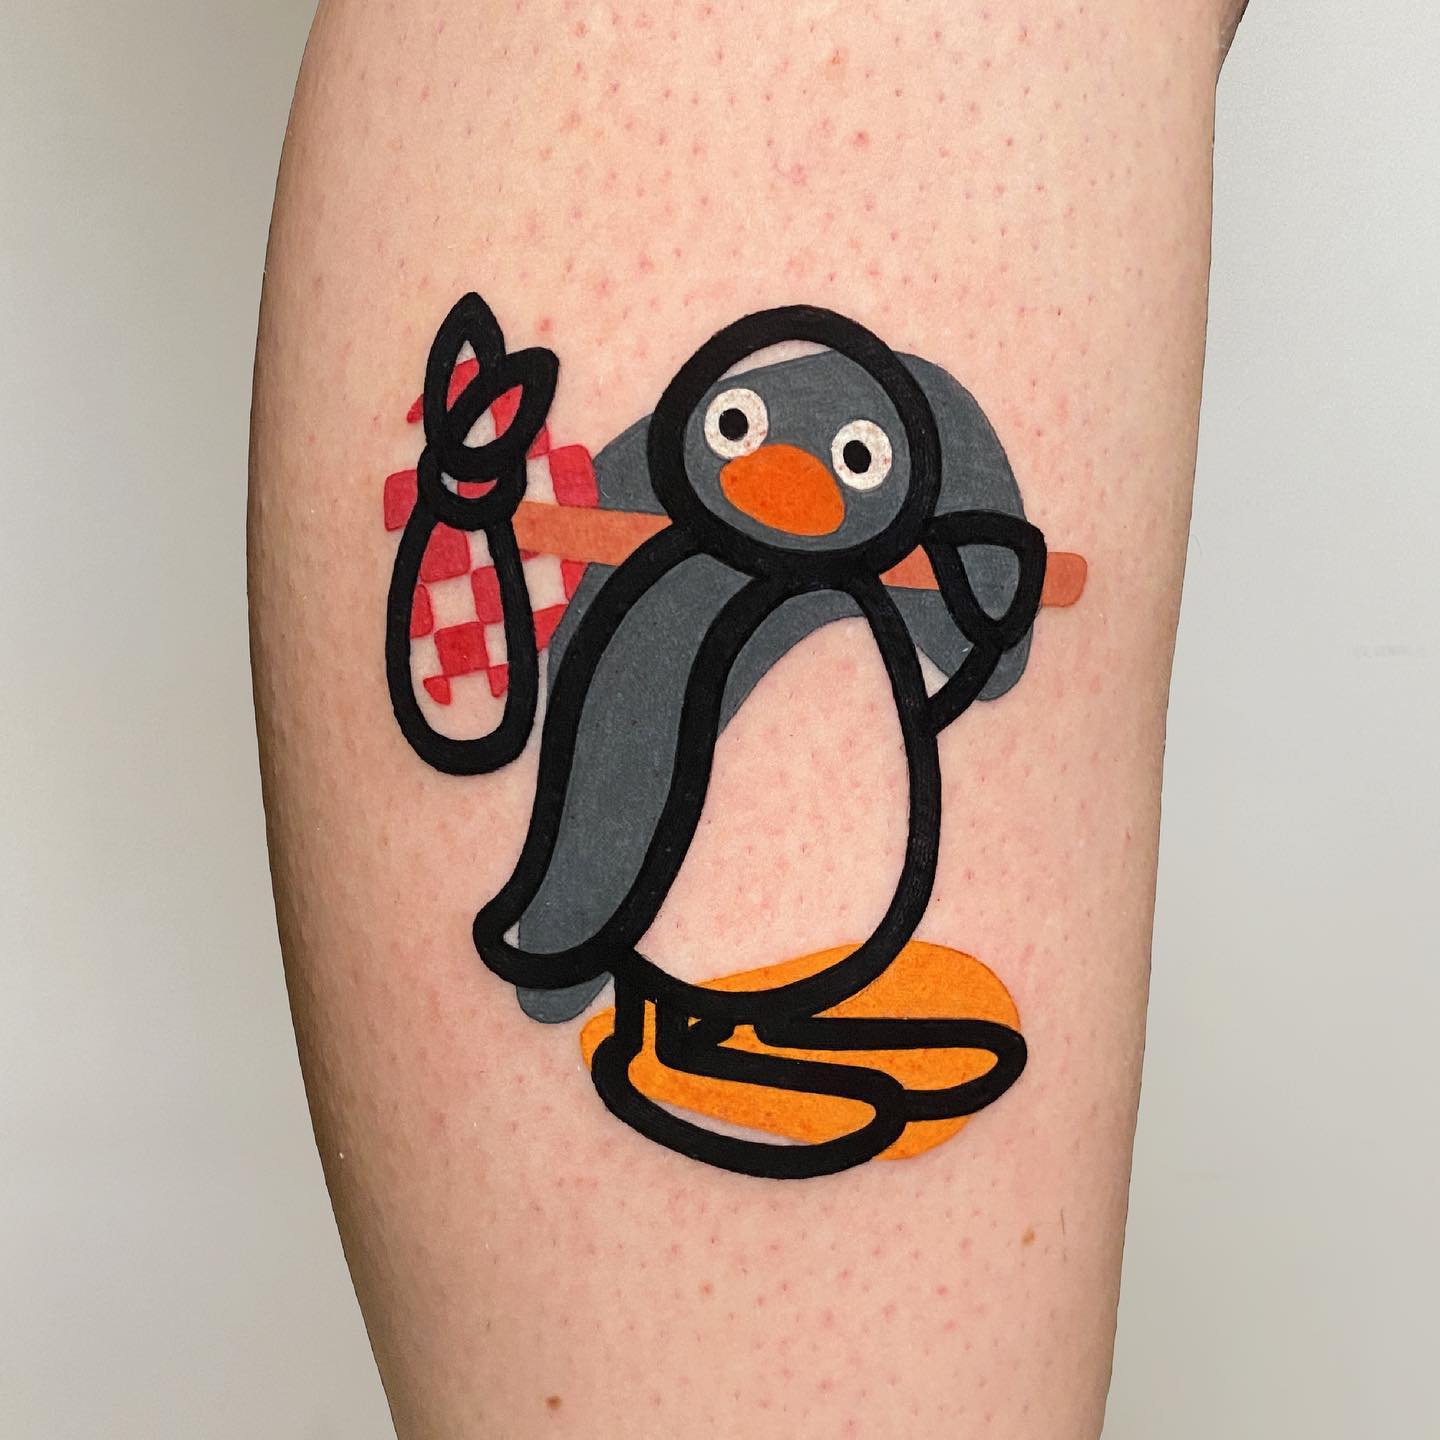 Do you remember the cartoon called 'Pingu'? It was broadcasted in 90s and it was so popular back then. Noot noot!